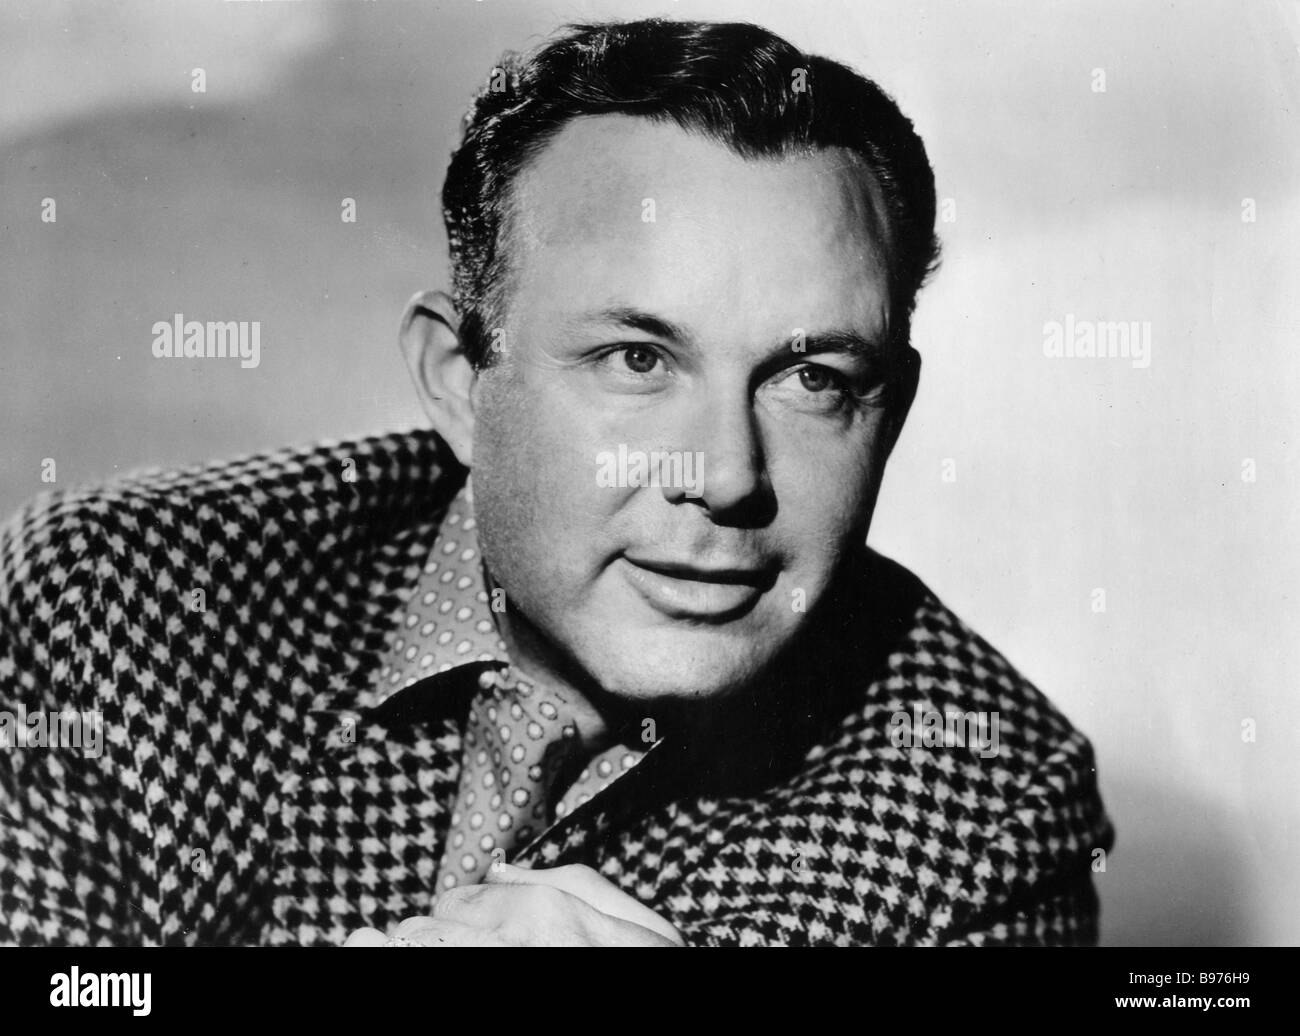 JIM REEVES US Country Western musician Stock Photo